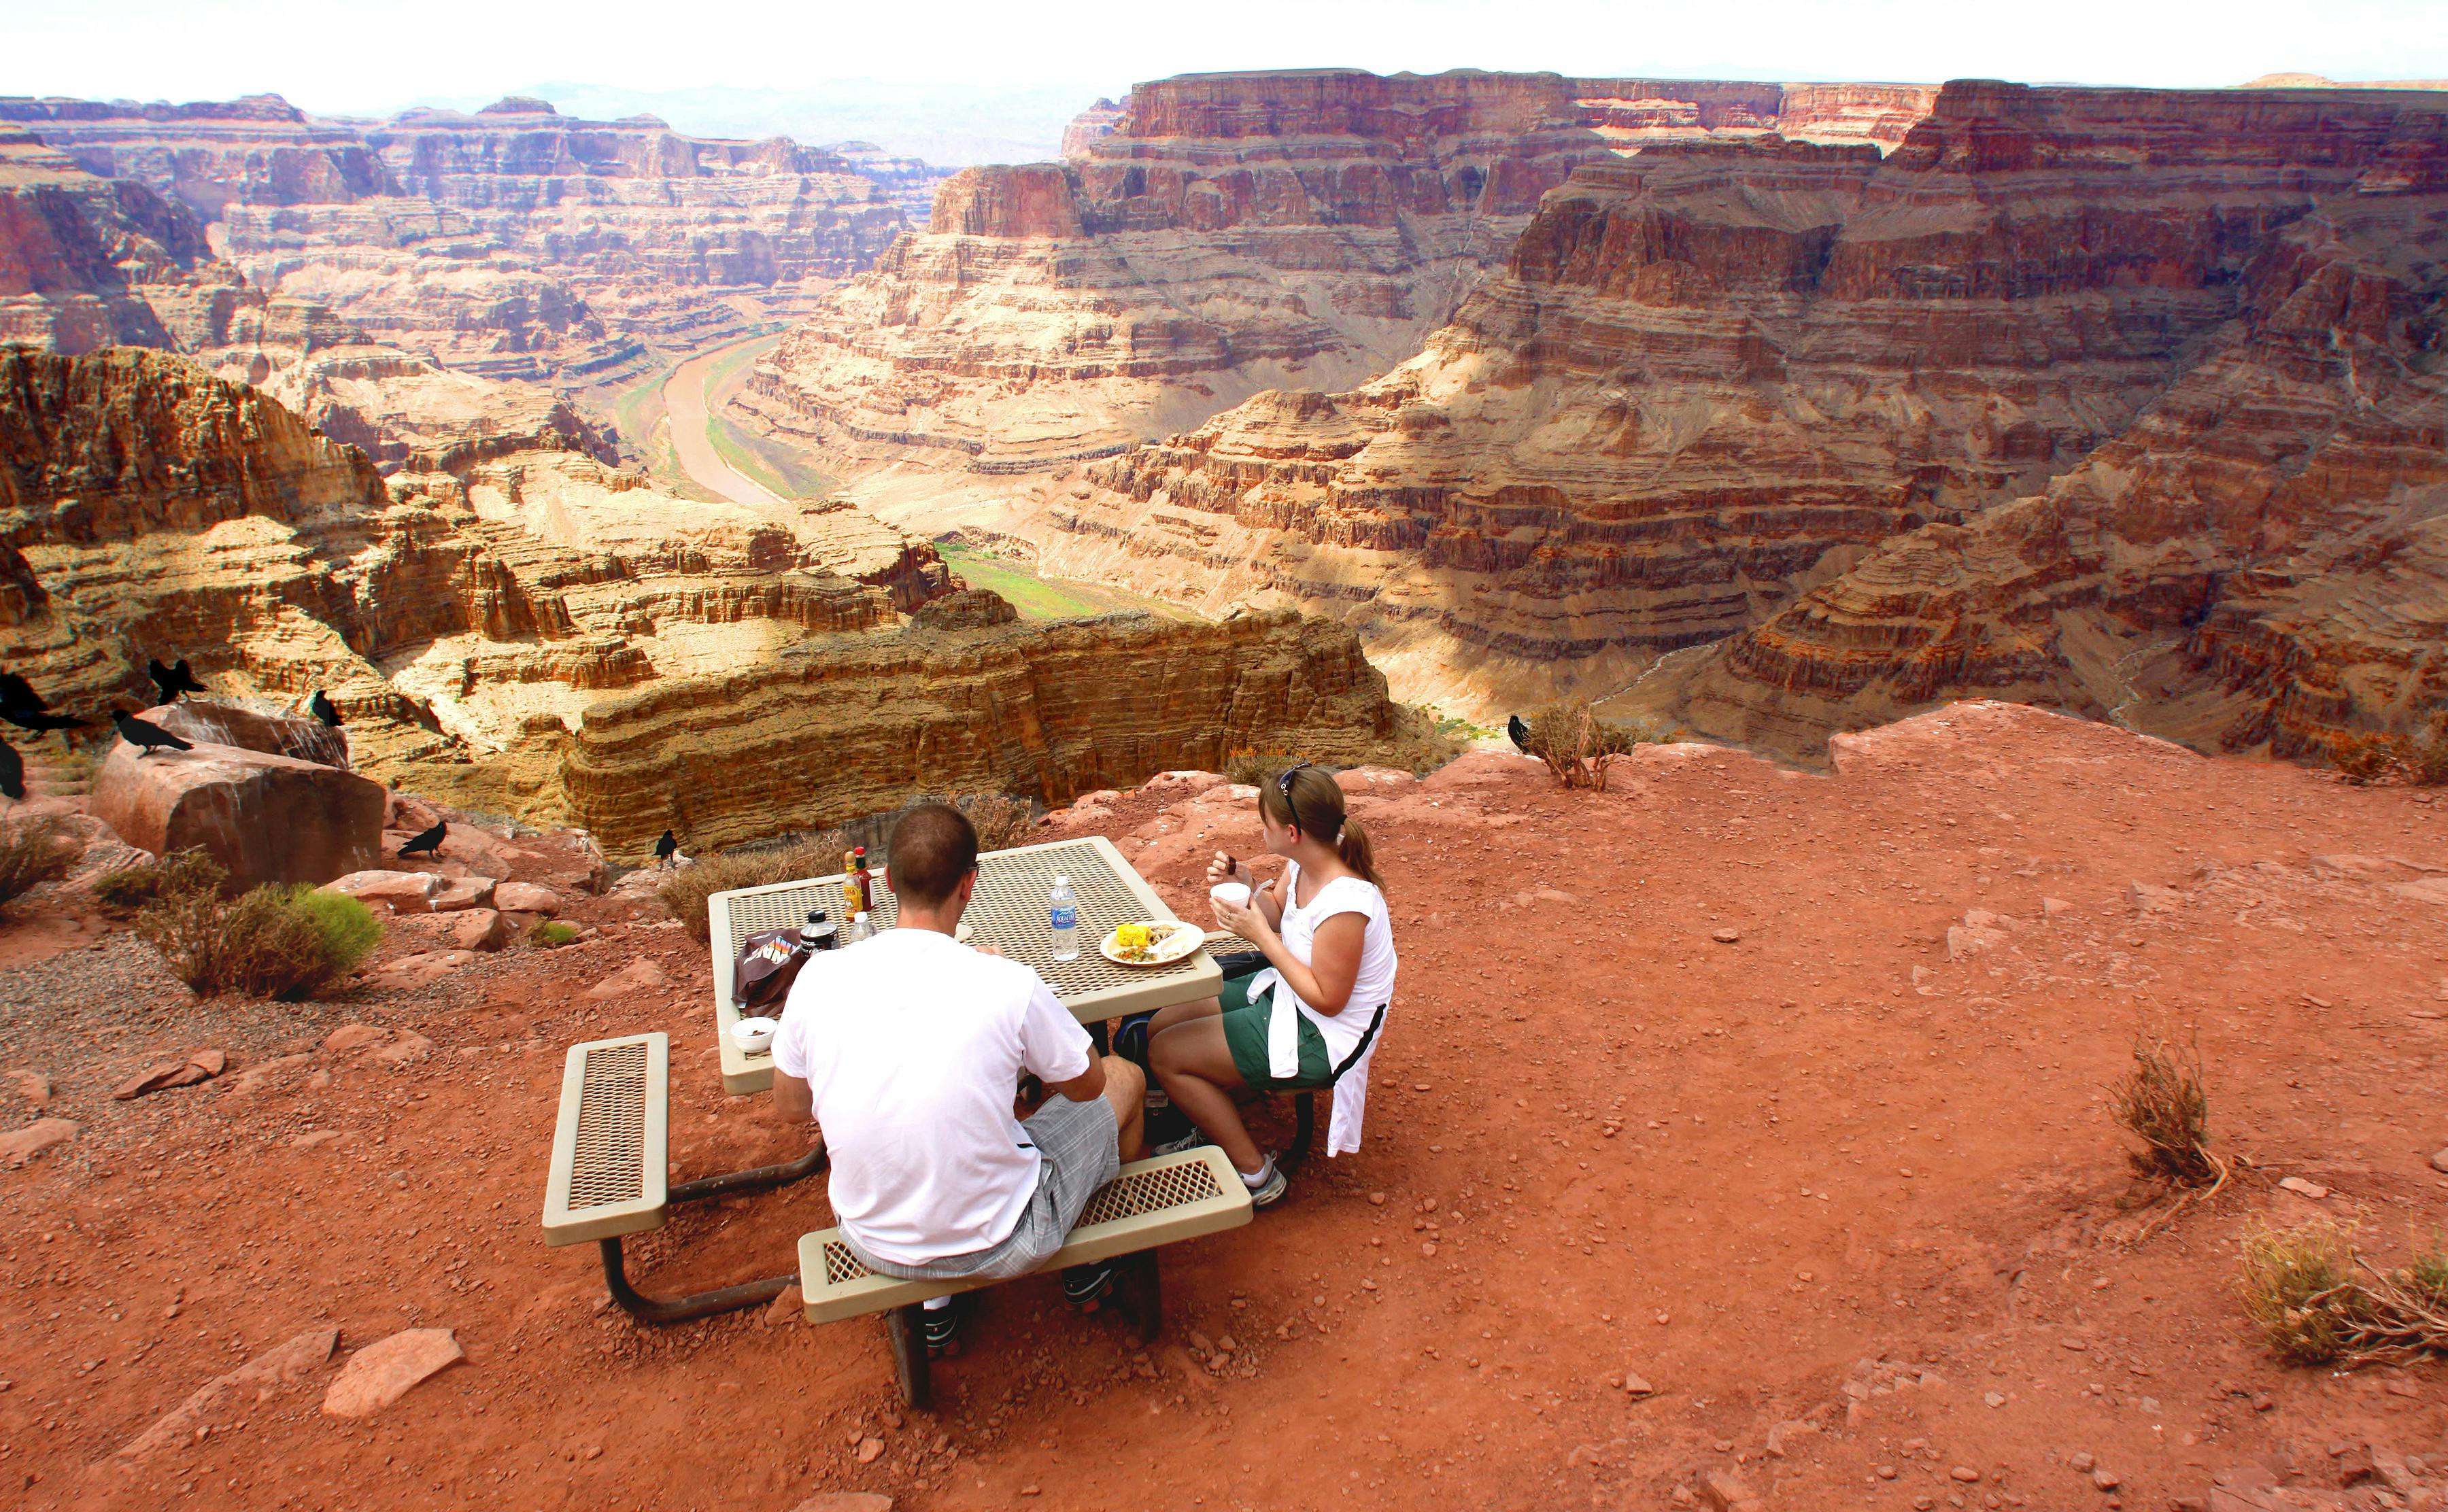 Grand Canyon West Rim 5 in 1 Tour APT © Lunch on the Rim at Guano Point 3.jpg